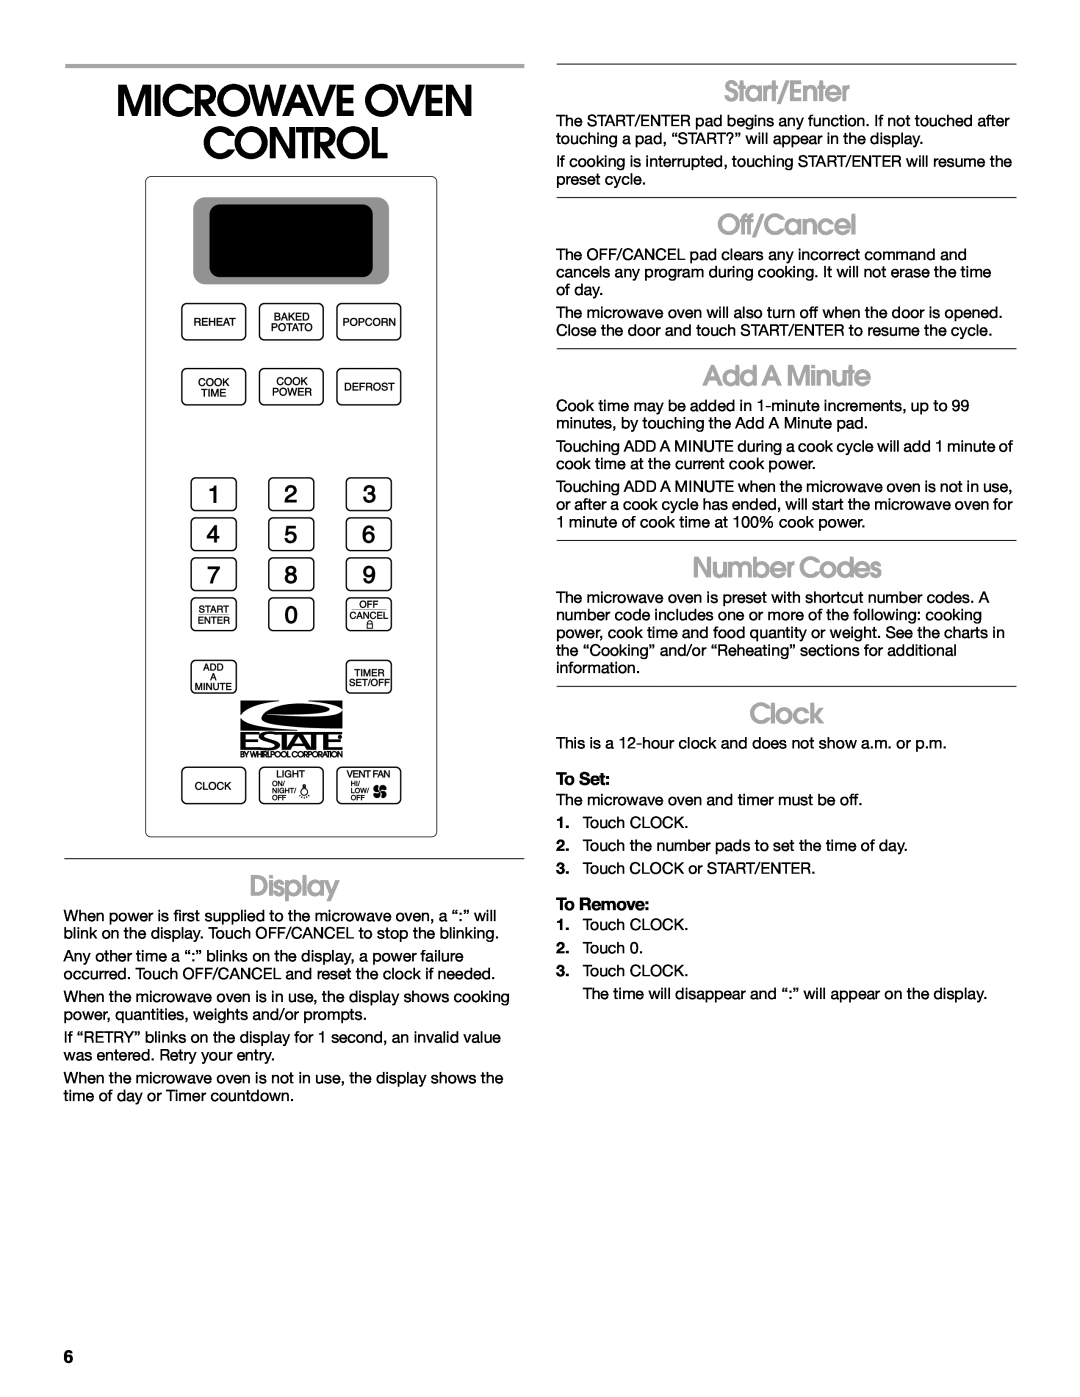 Whirlpool TMH14XM manual Microwave Oven Control, Display, Start/Enter, Off/Cancel, Add A Minute, Number Codes, Clock 